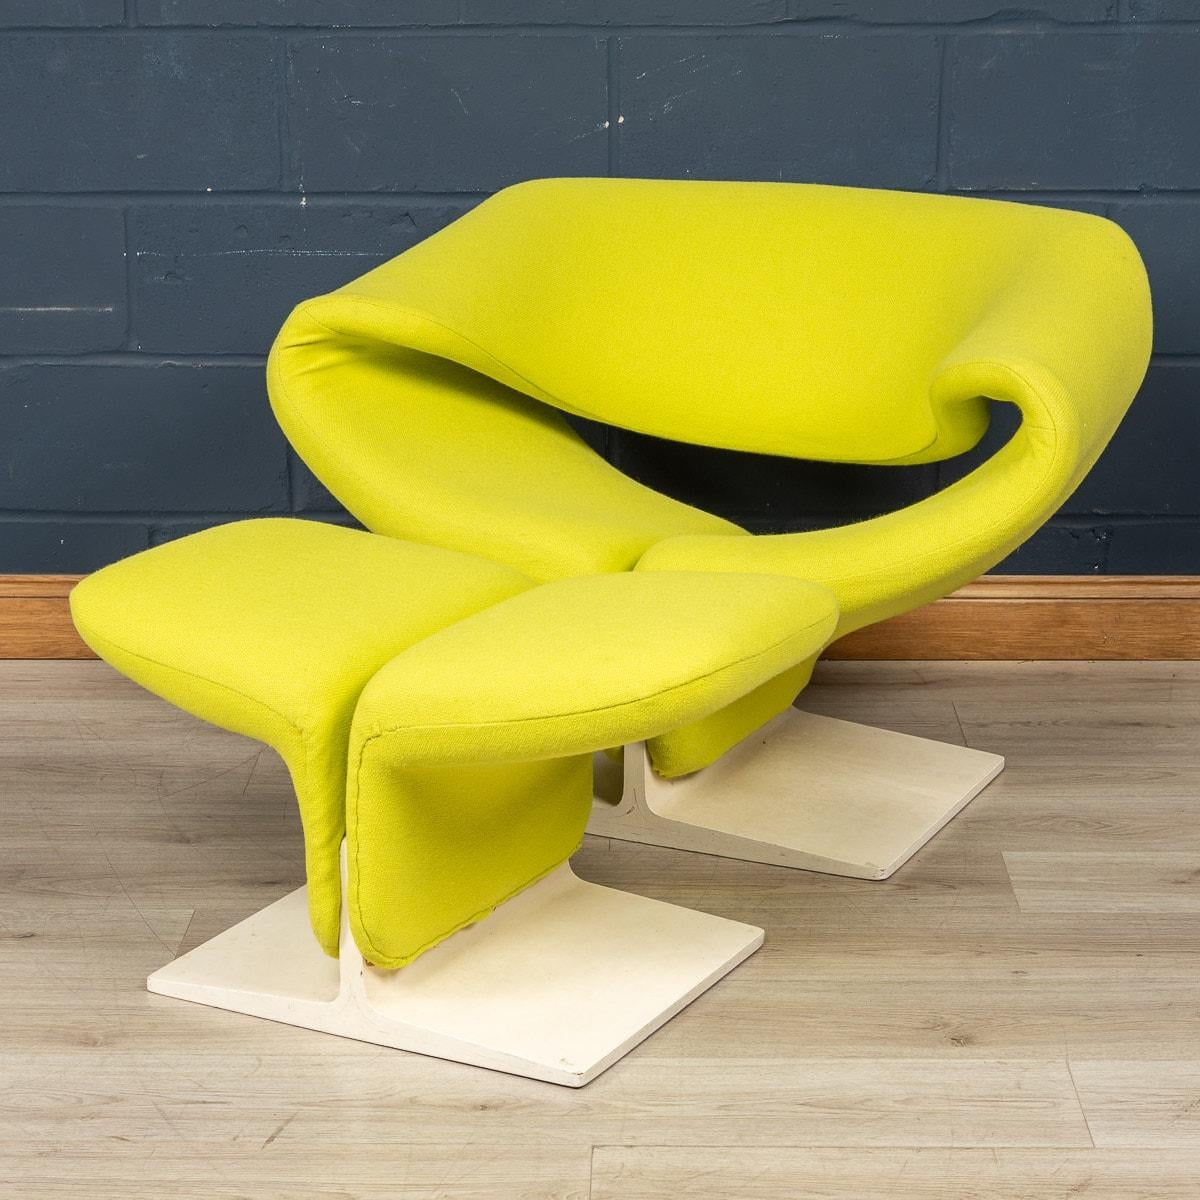 A rare “Ribbon” chair and footstool, originally designed 1960s by Pierre Paulin for Artifort, France. Of sculptural form with lime green wool upholstery and white painted wood, these items are a true statement piece and a testament to Pierre